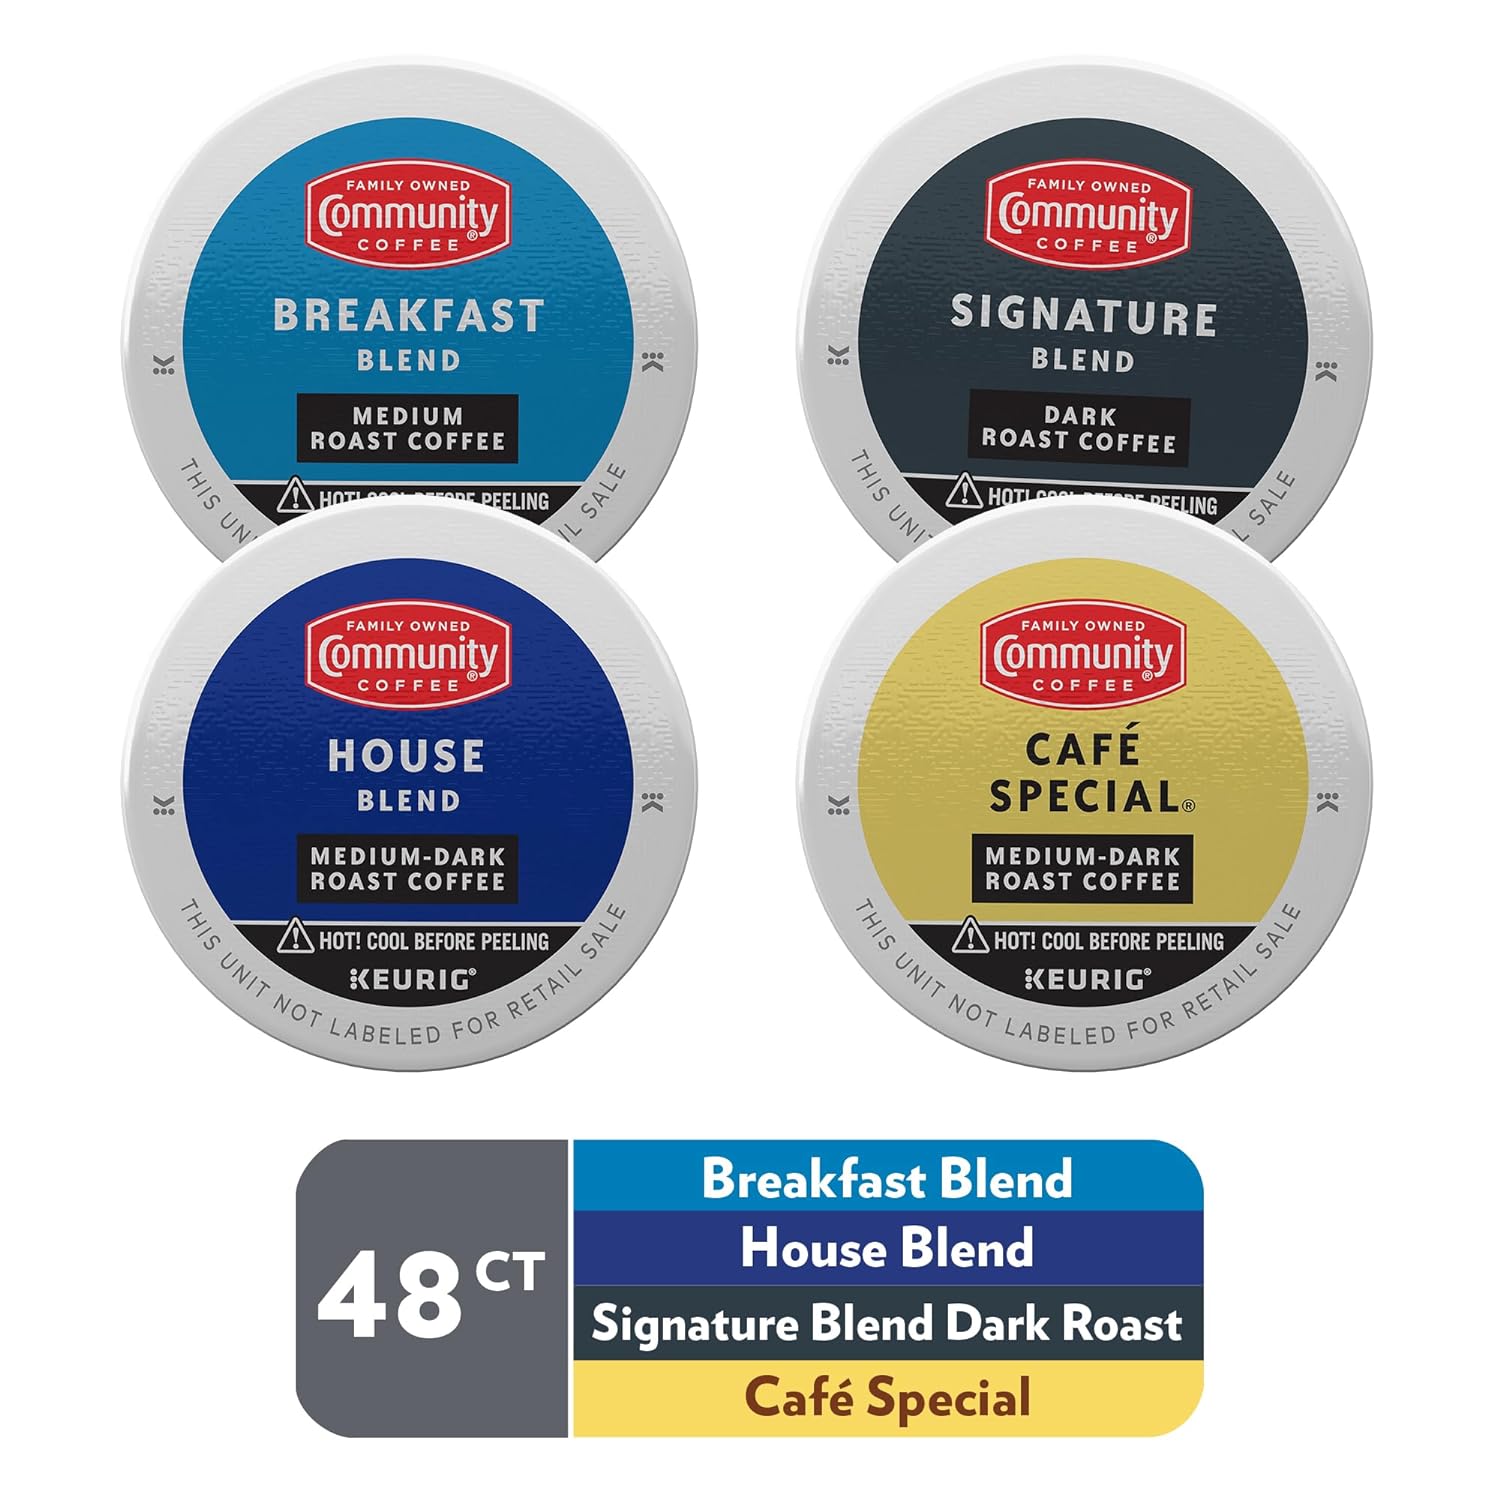 Community Coffee Variety Pack 48 Count Coffee Pods, Medium Dark Roast, Compatible with Keurig 2.0 K-Cup Brewers, 12 Count (Pack of 4)